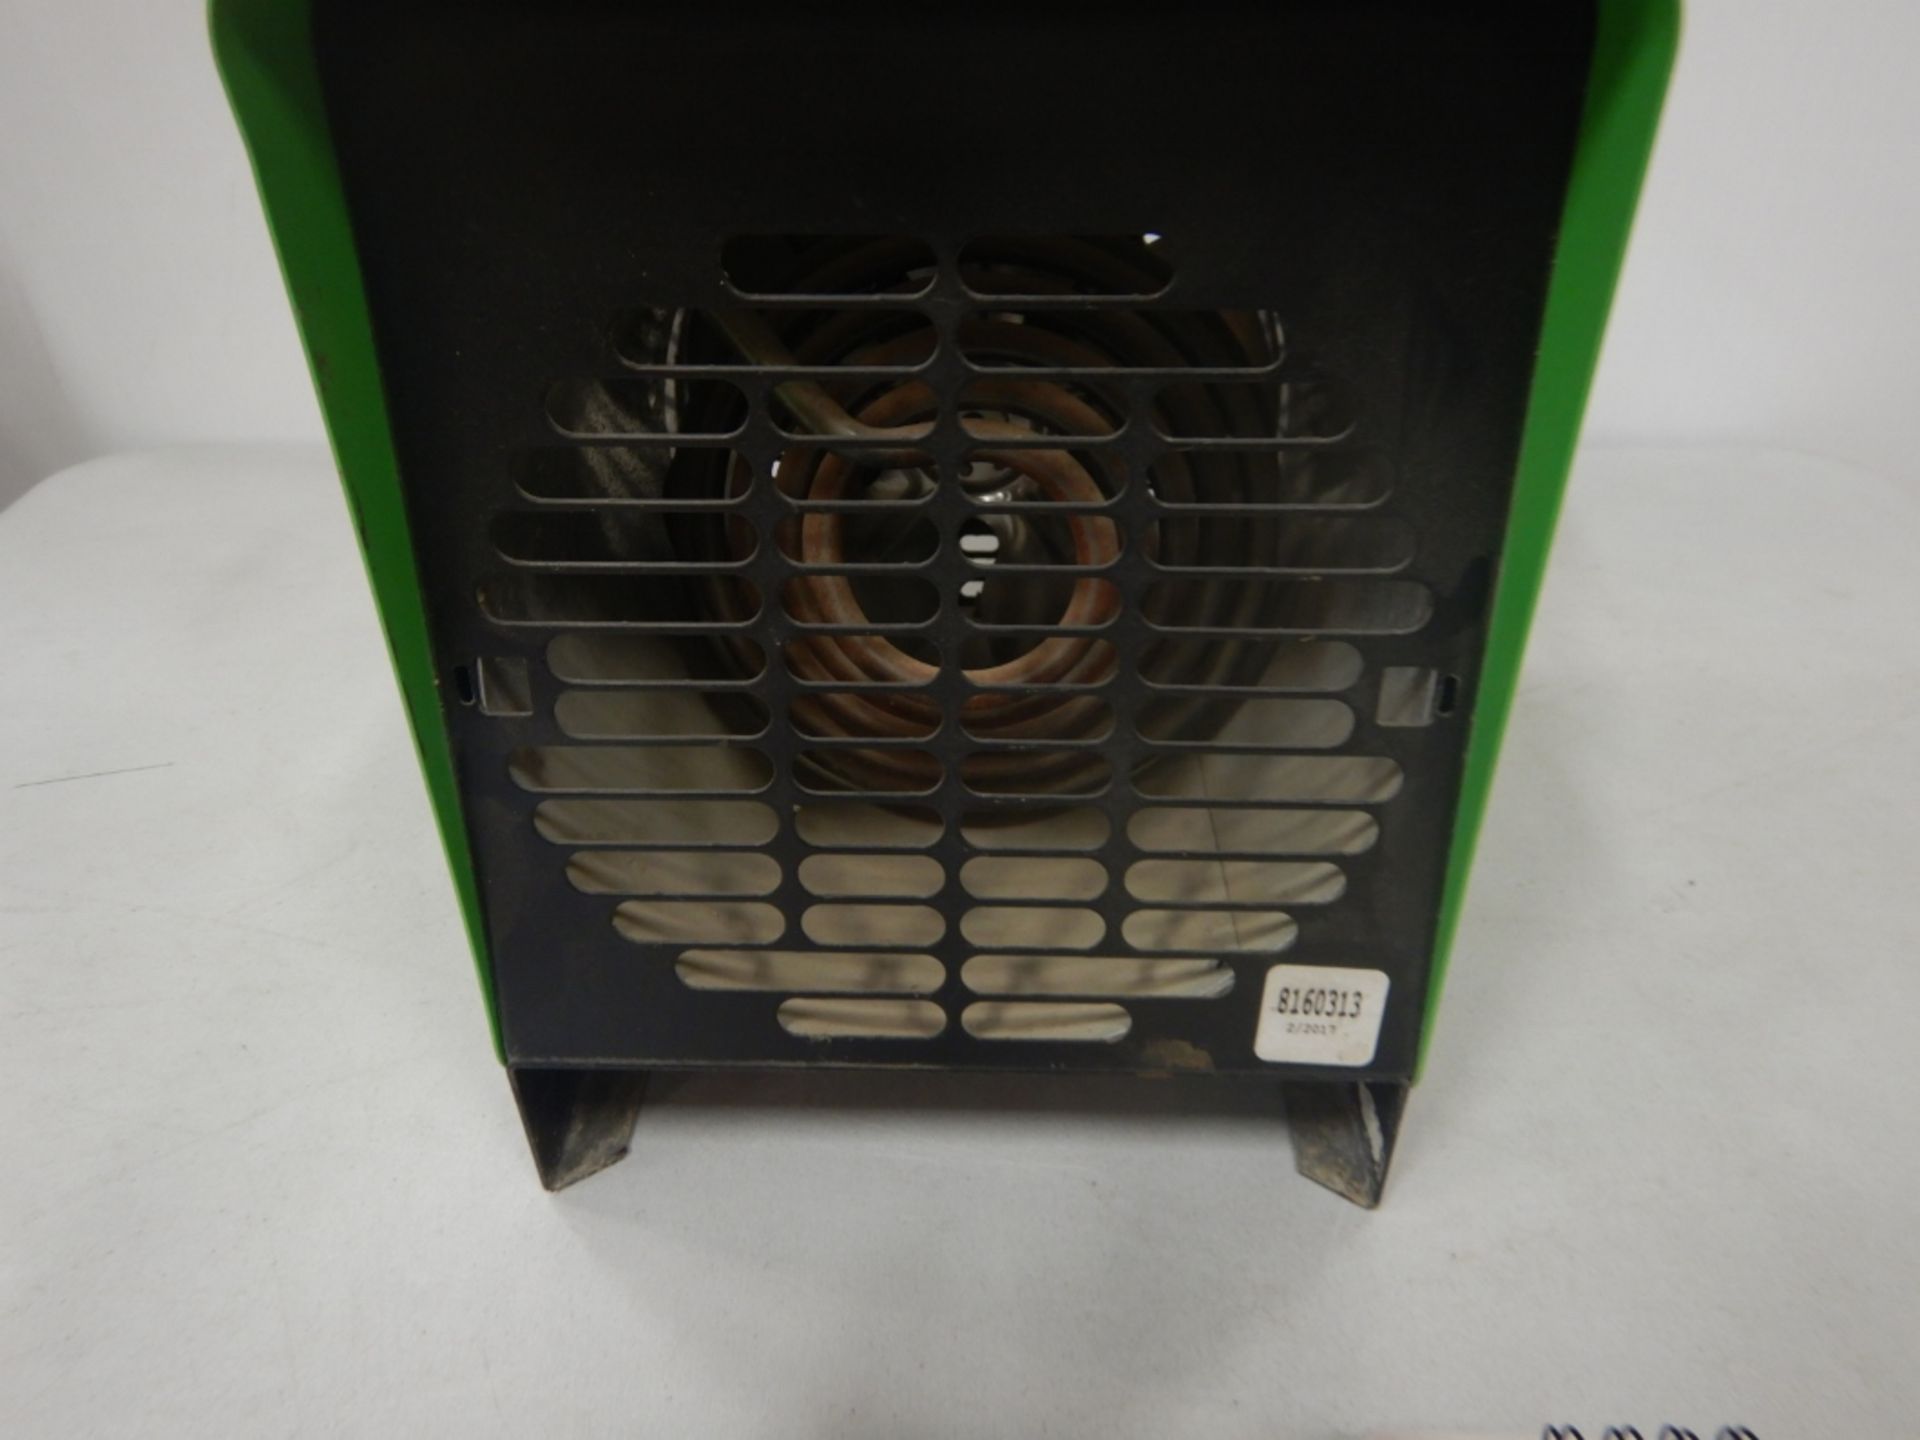 PATRON ELECTRIC CONSTRUCTION HEATER MODEL P-1500 120V - Image 2 of 3